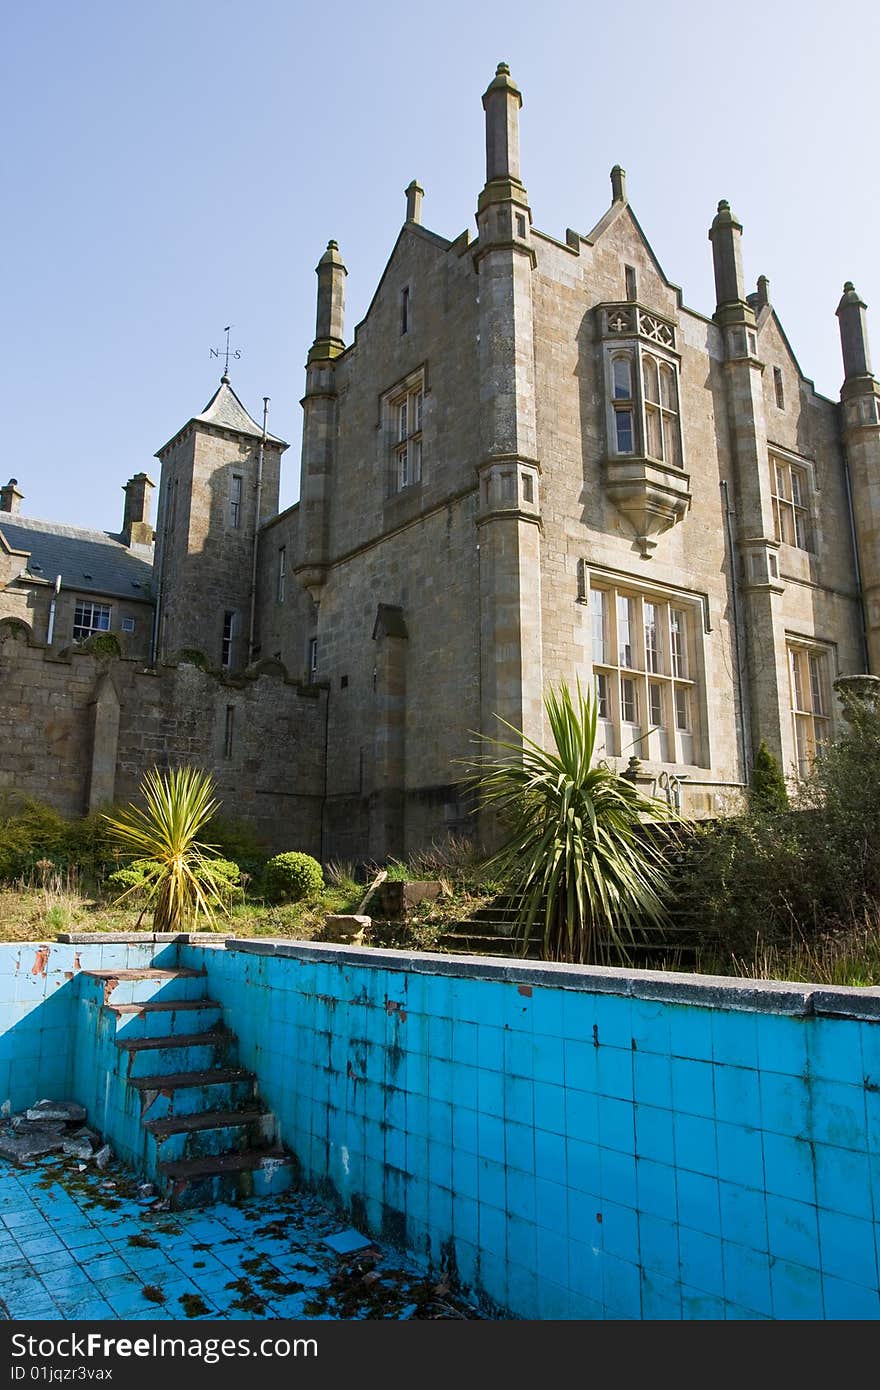 Mansion with a derelict out door pool. Mansion with a derelict out door pool